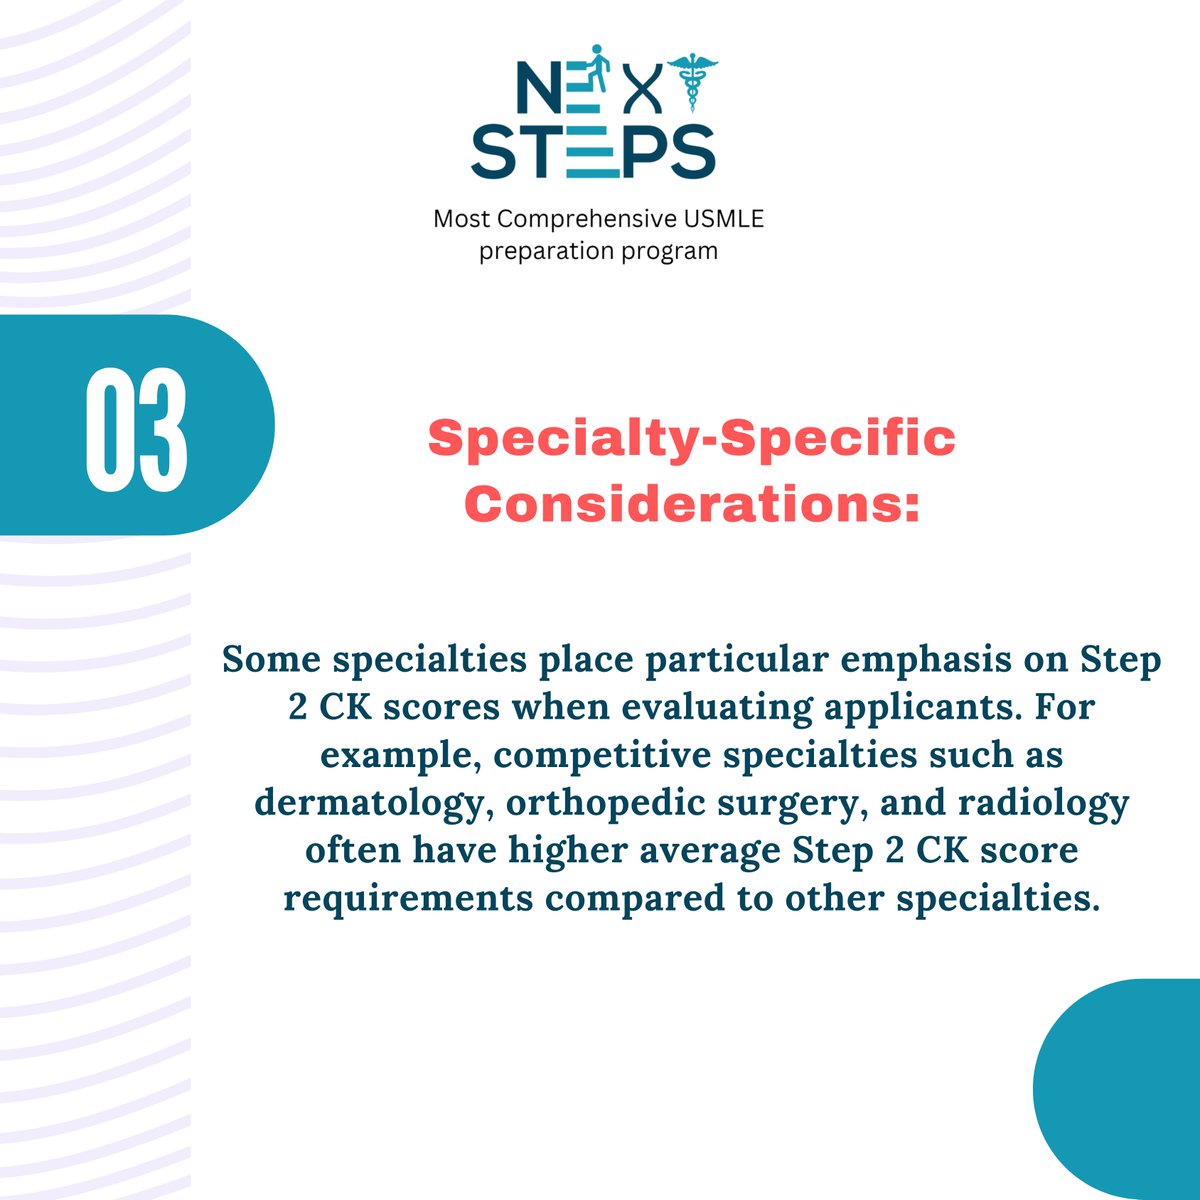 📈 Step up your residency game! Learn why the USMLE Step 2 CK exam is crucial for your application success.
Enroll Now:nextstepscareer.com/usmle-preparat…

#usmle #step1 #step2ck #Residency #residencymatch #usmlematch #usmlepreparation #nextsteps #nextstepsusmle